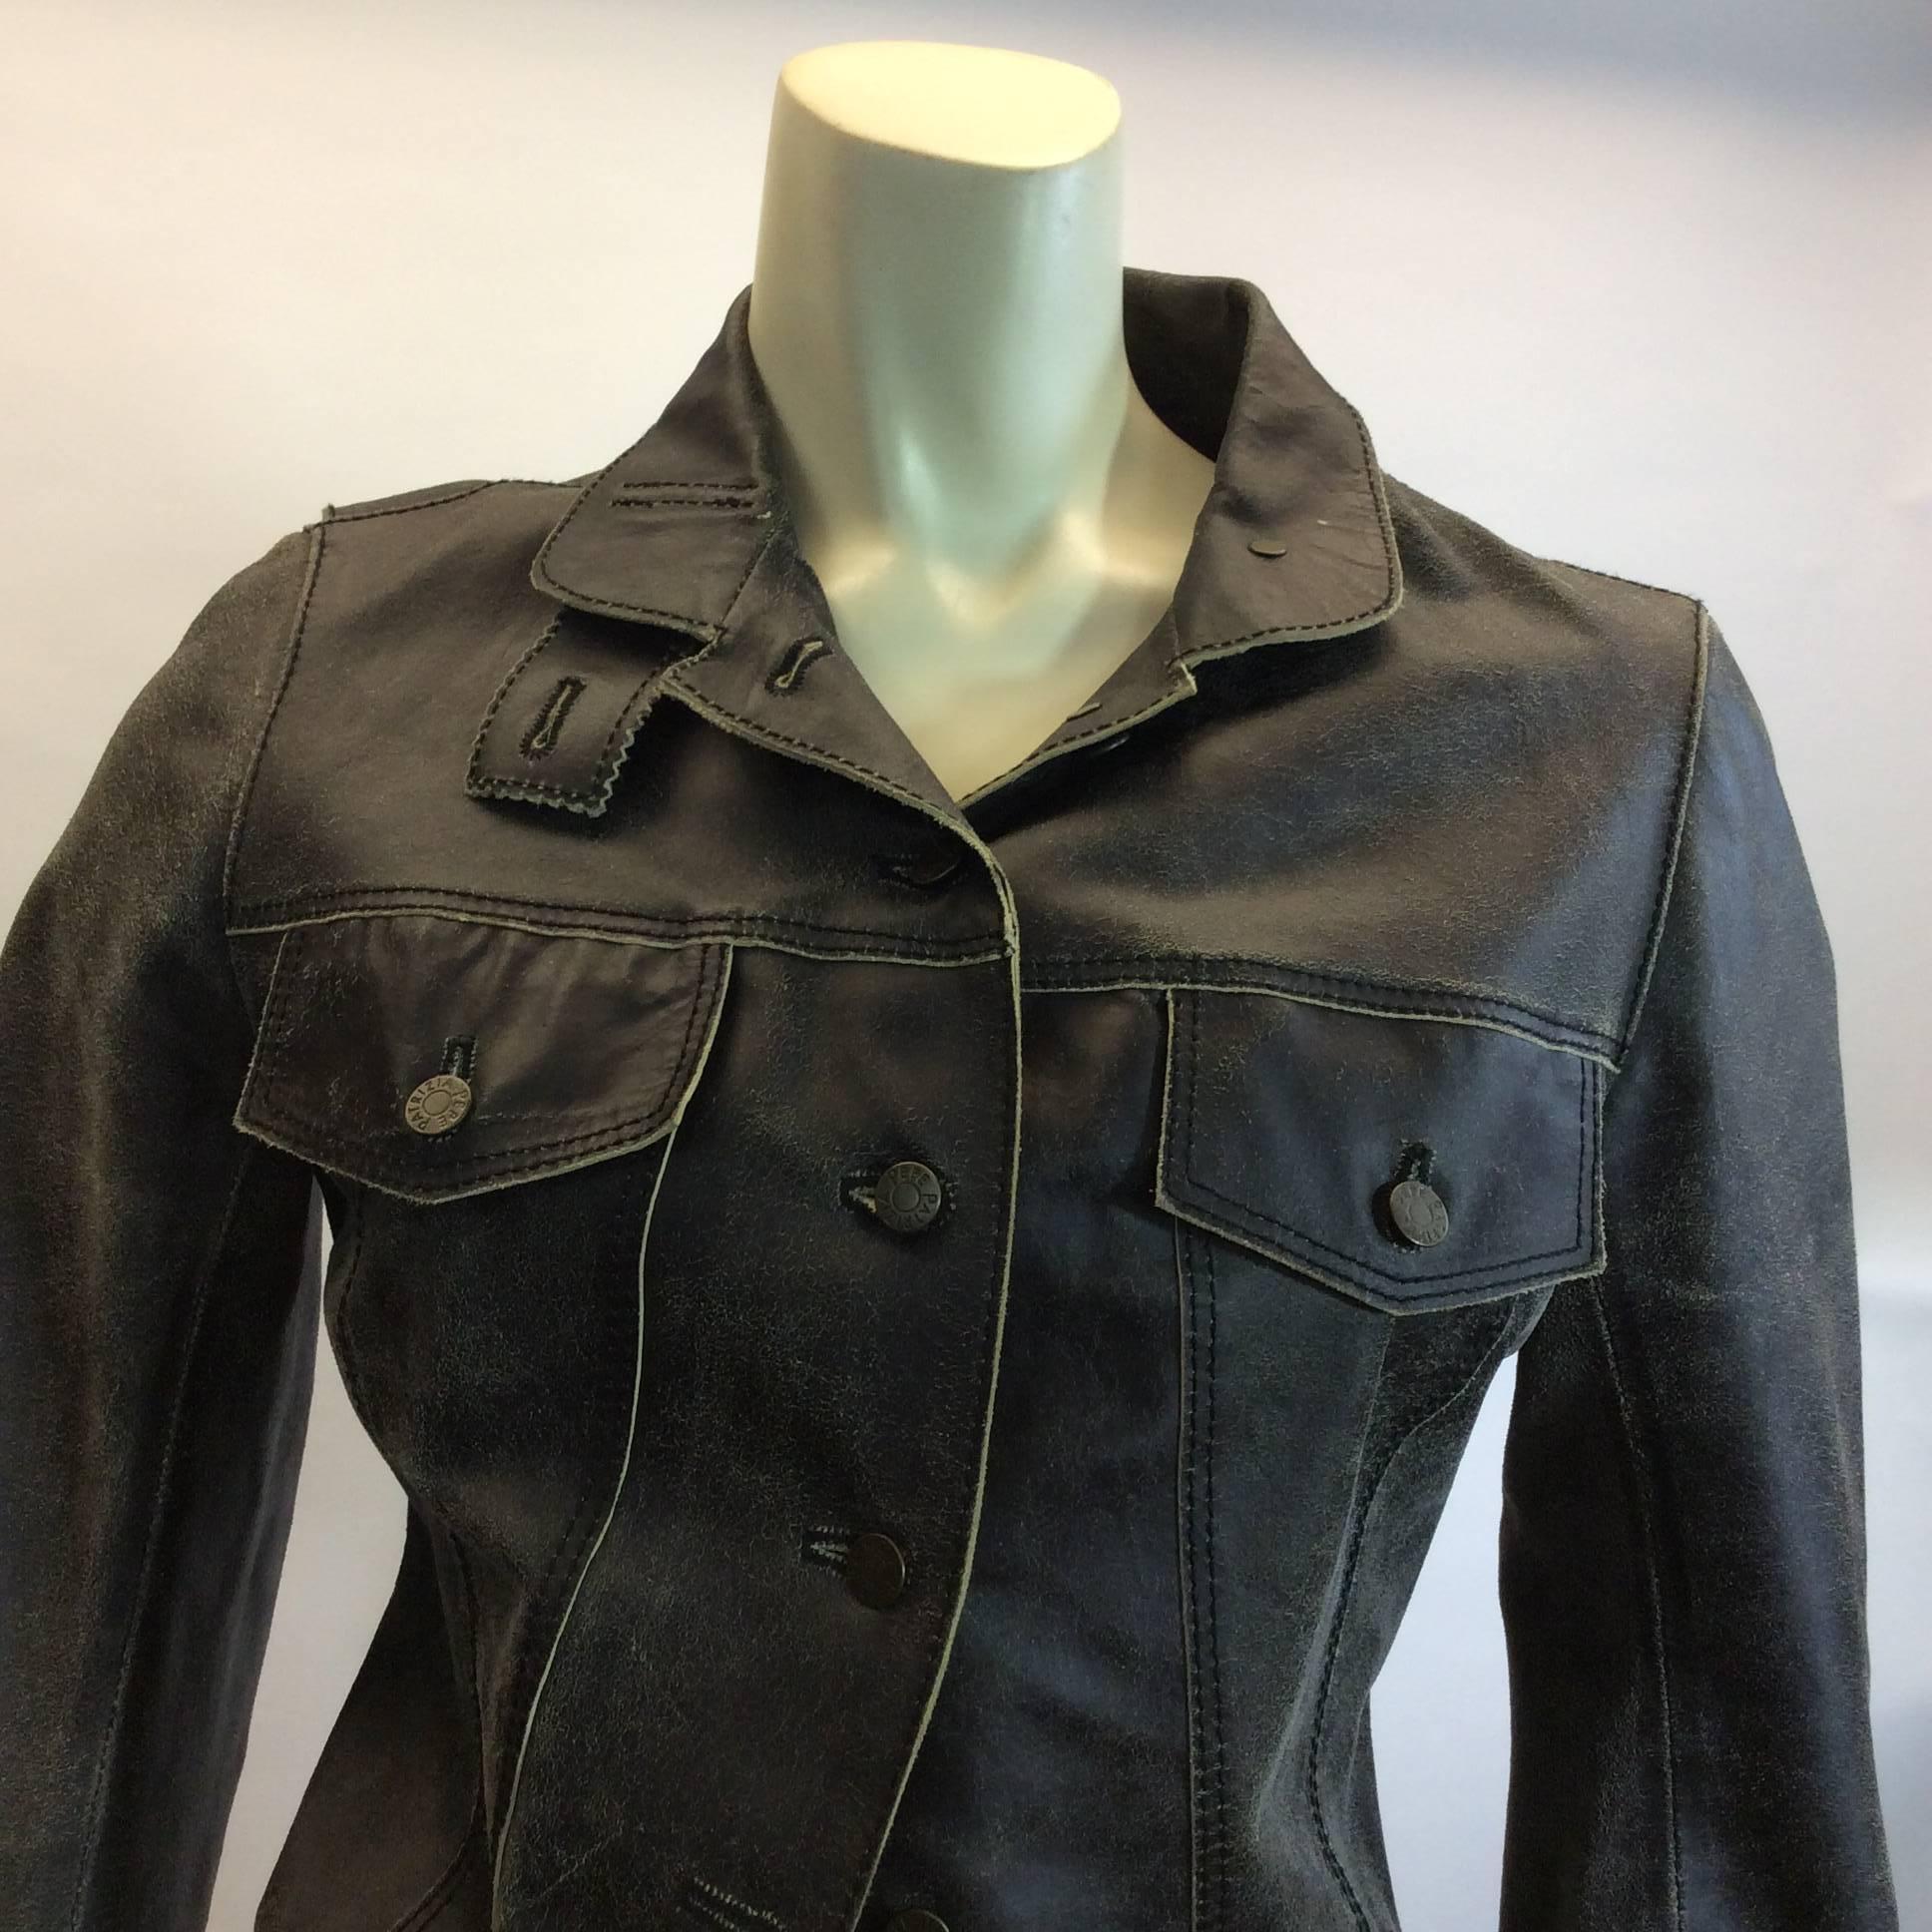 Patricia Pepe Leather Moto Button Jacket
Size 40
Distressed look
Cut high in the back
$299
100% leather 
